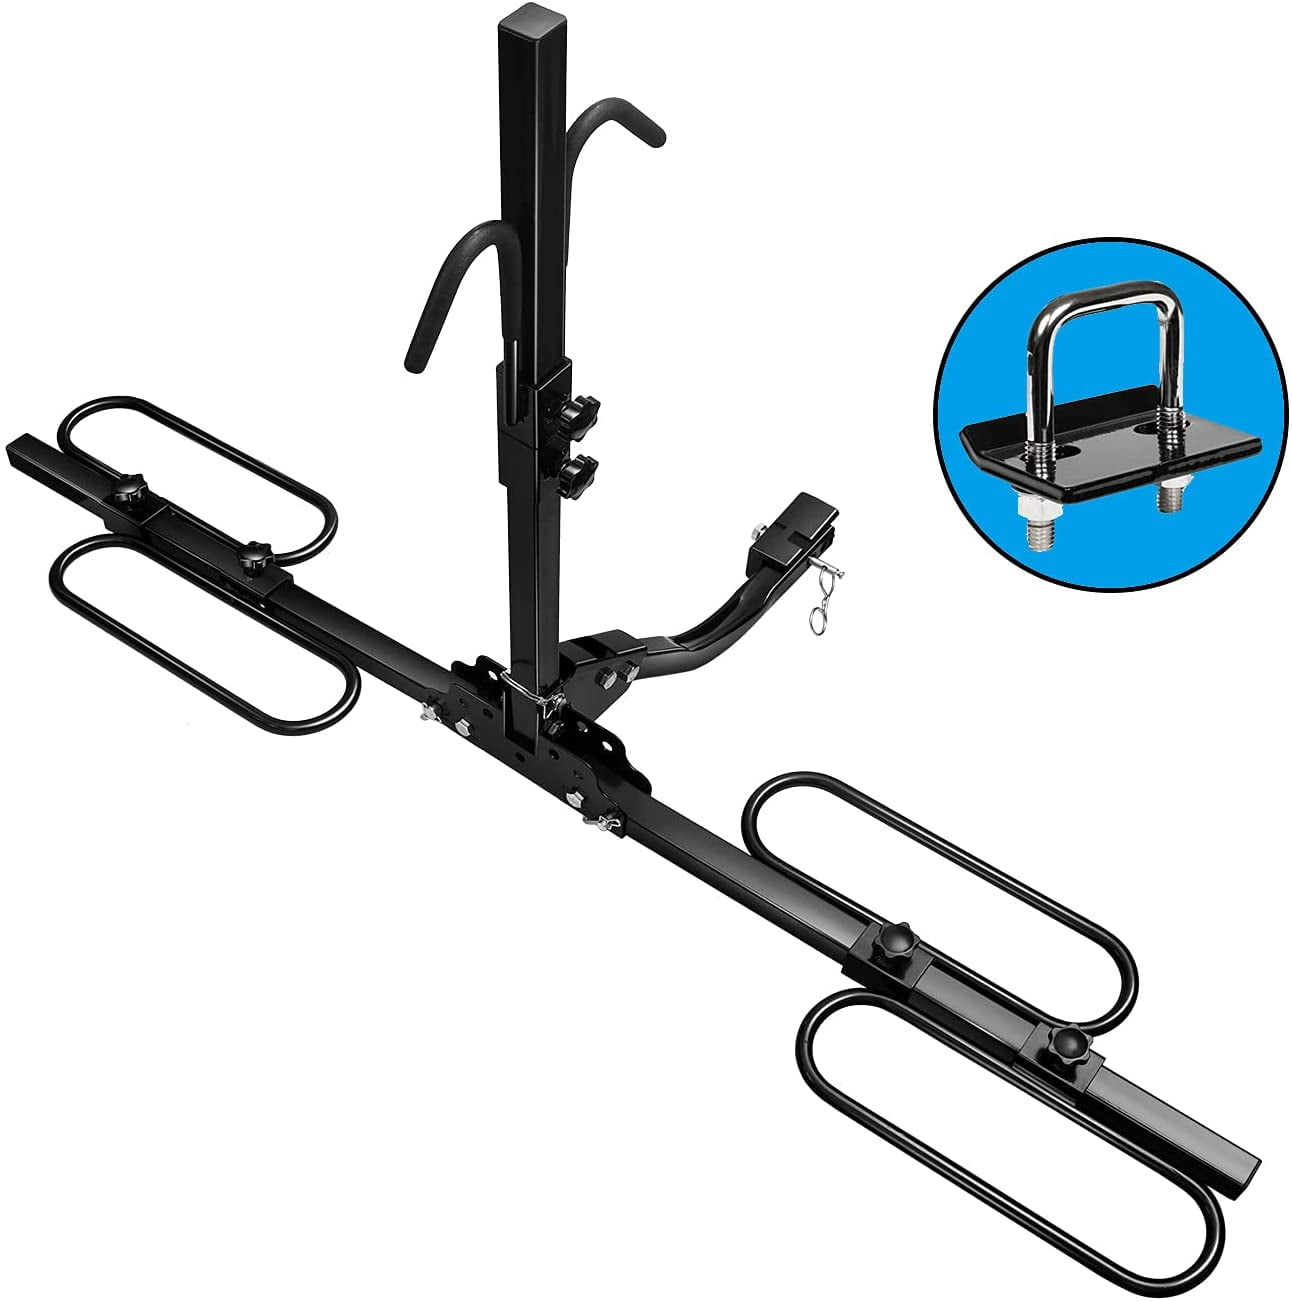 Rack 2 Bike Hitch Mount Carrier Trailer Car Truck SUV Receiver Bicycle Transport 